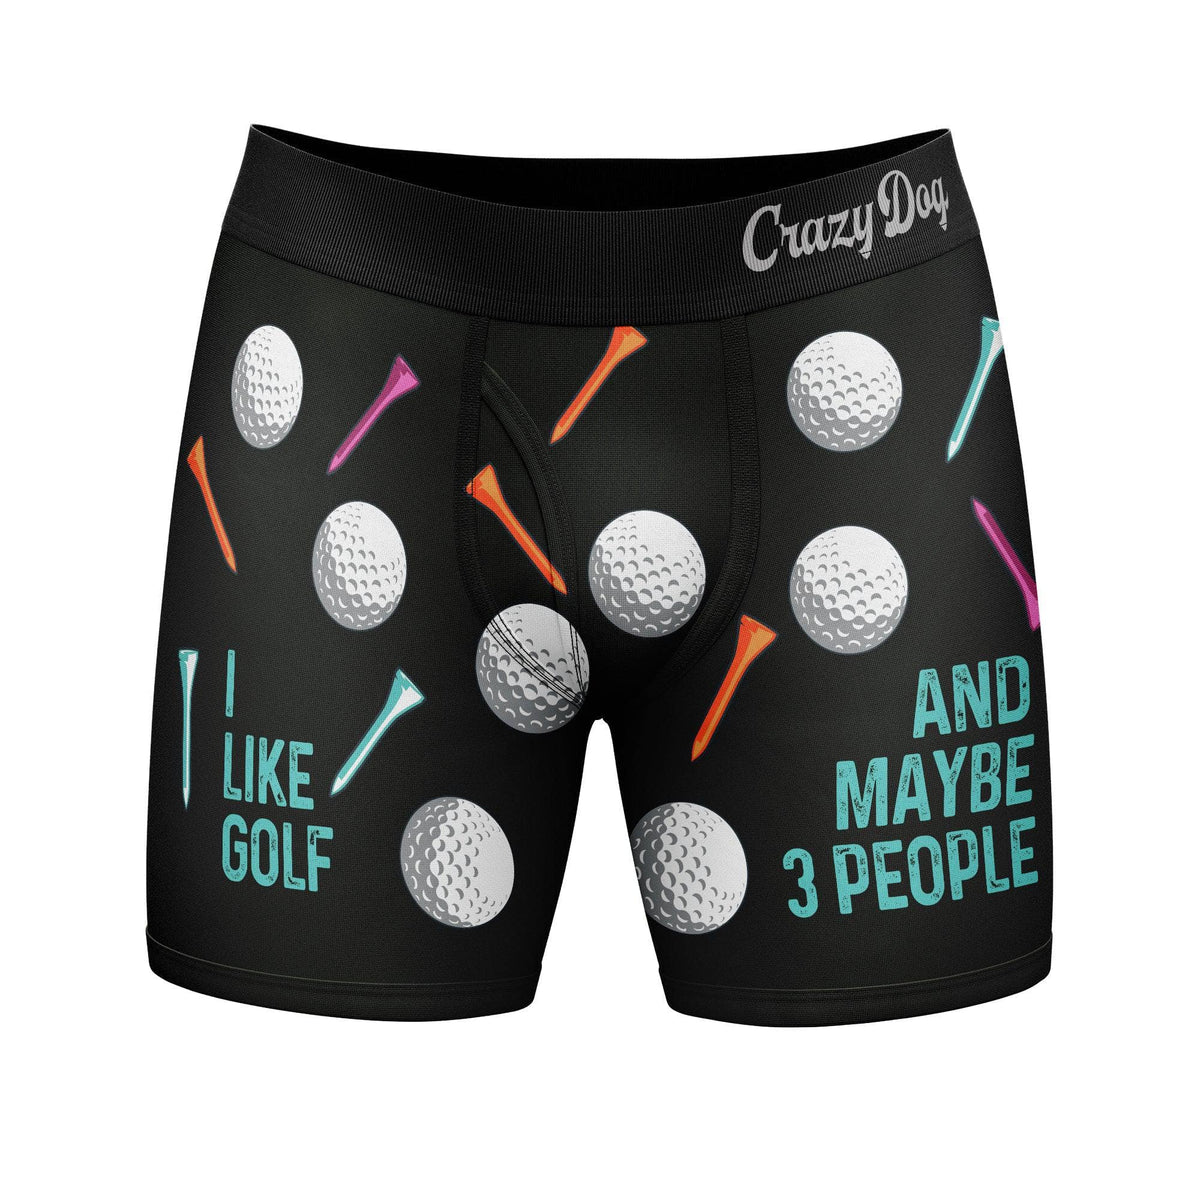 I Like Golf And Maybe 3 People  -  Crazy Dog T-Shirts